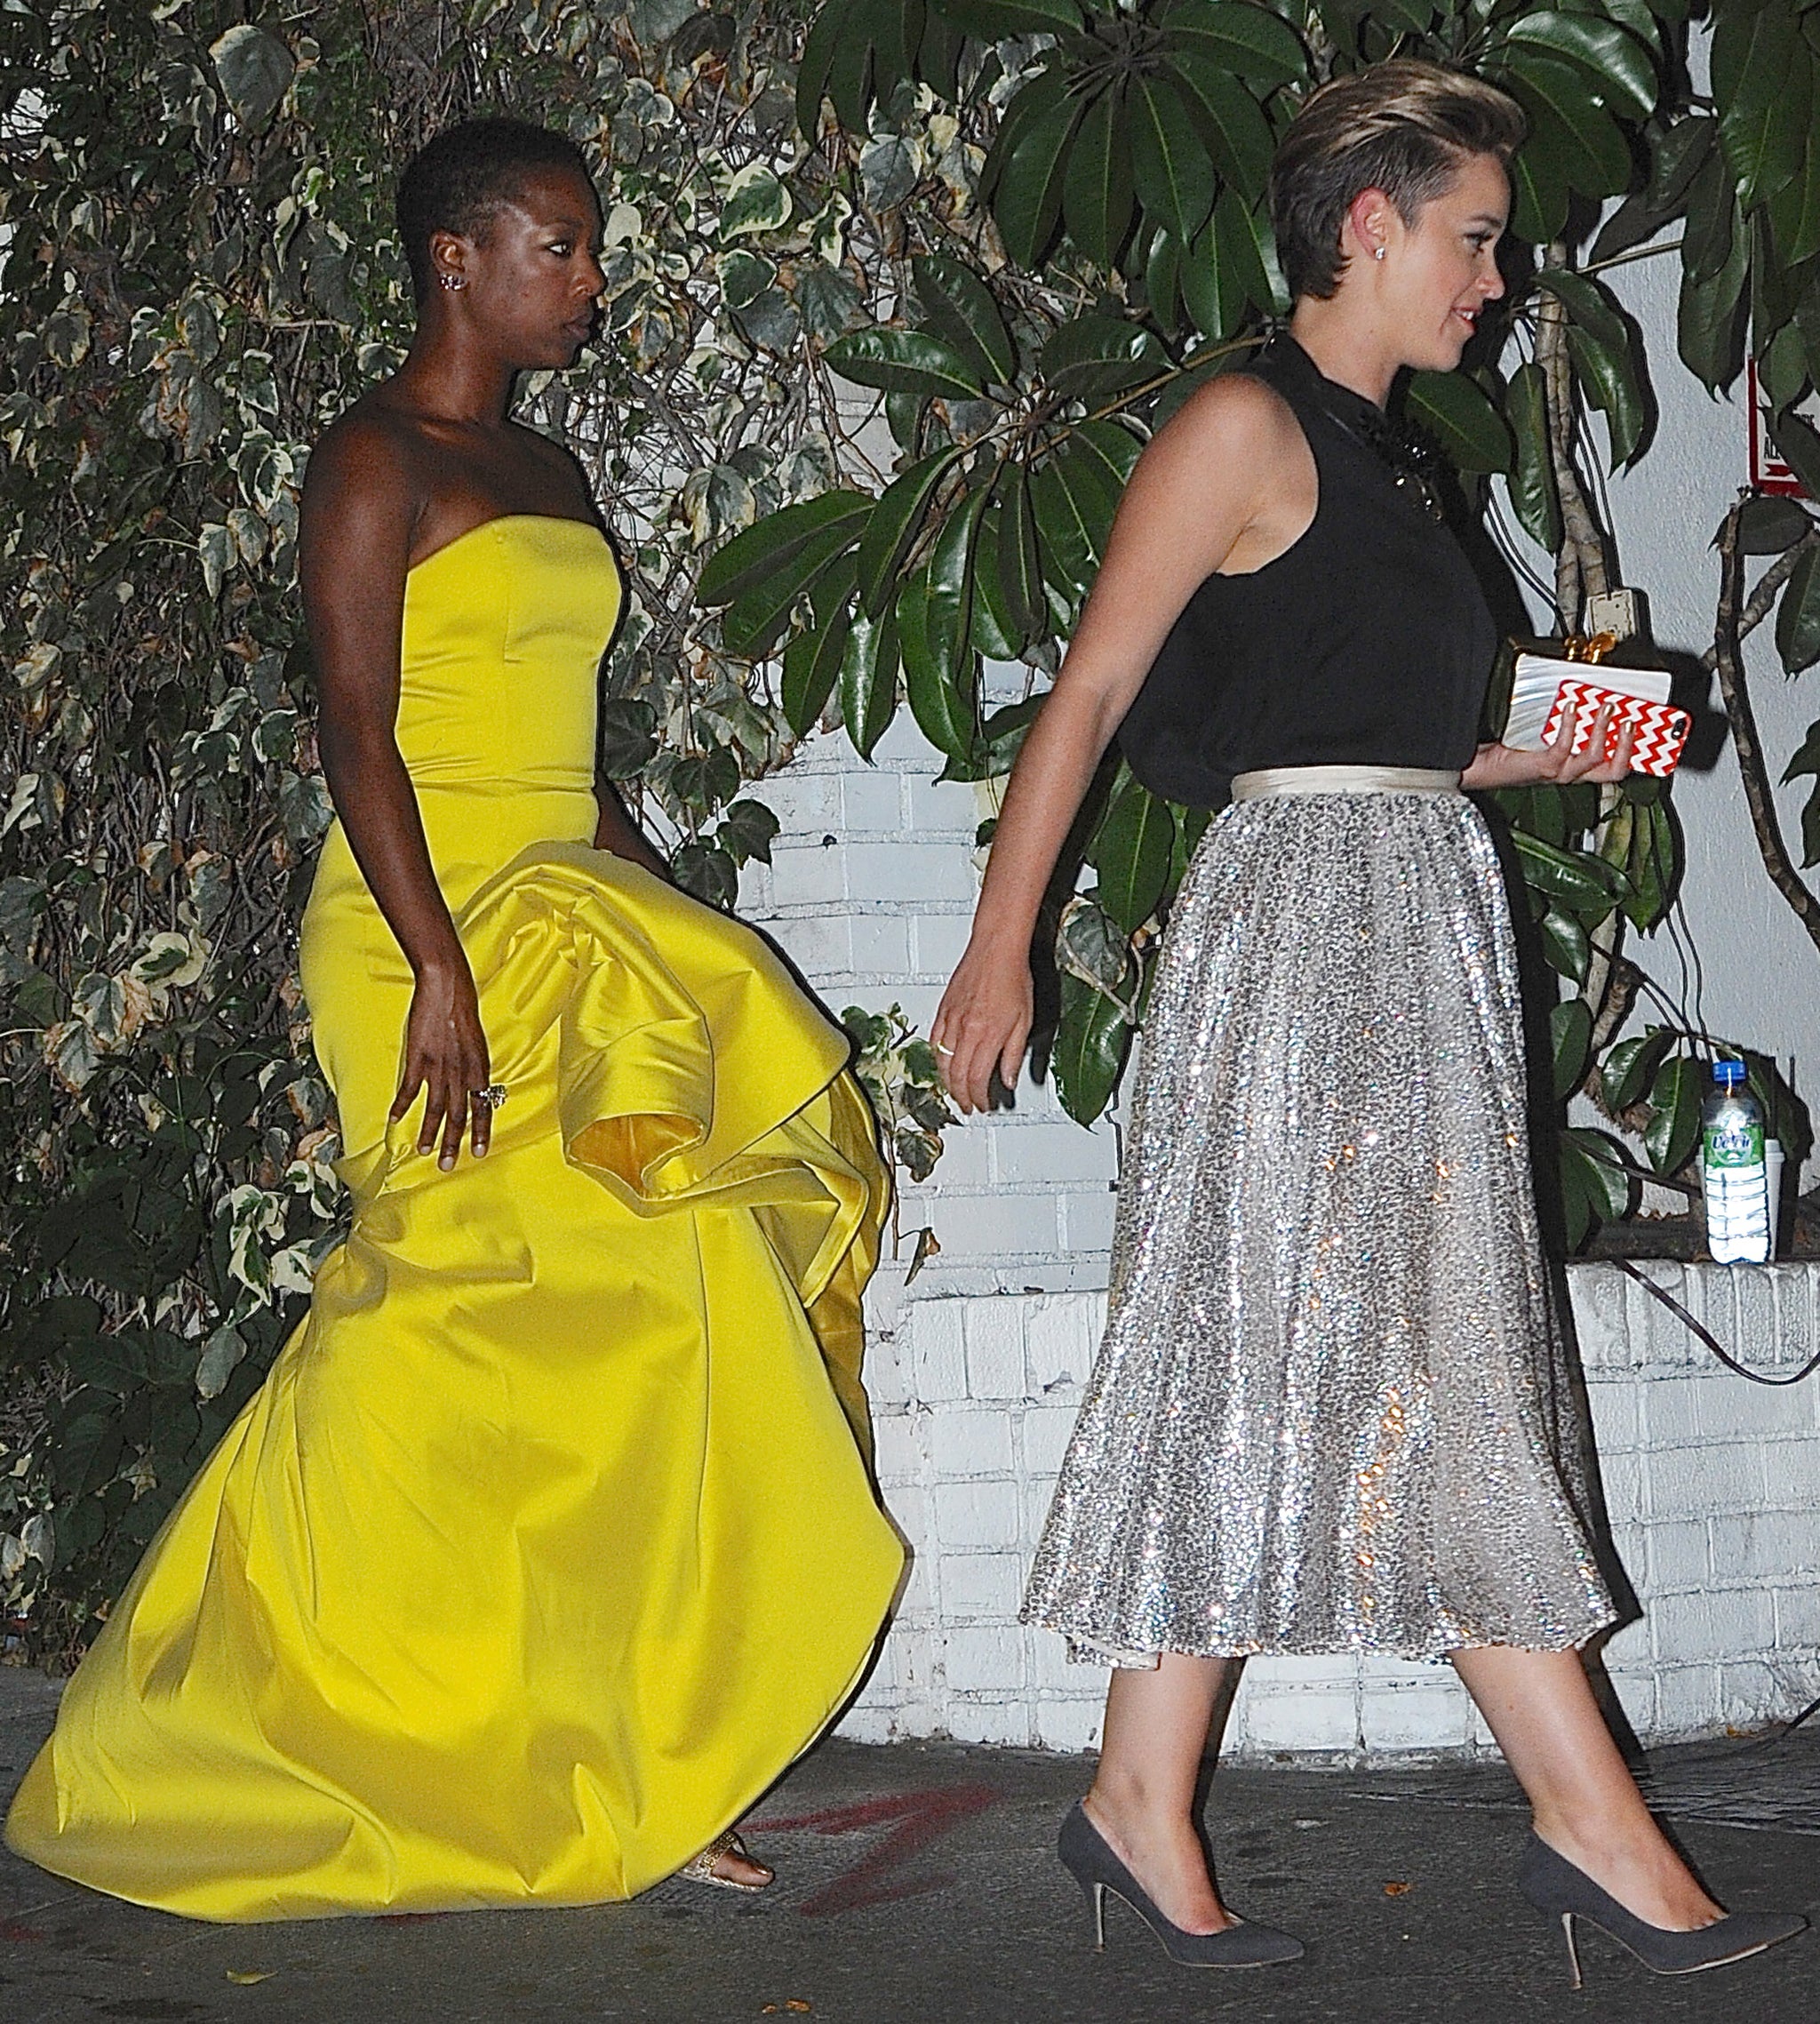 Samira Wiley and Lauren Morelli pictured at an Emmys afterparty in August 2014